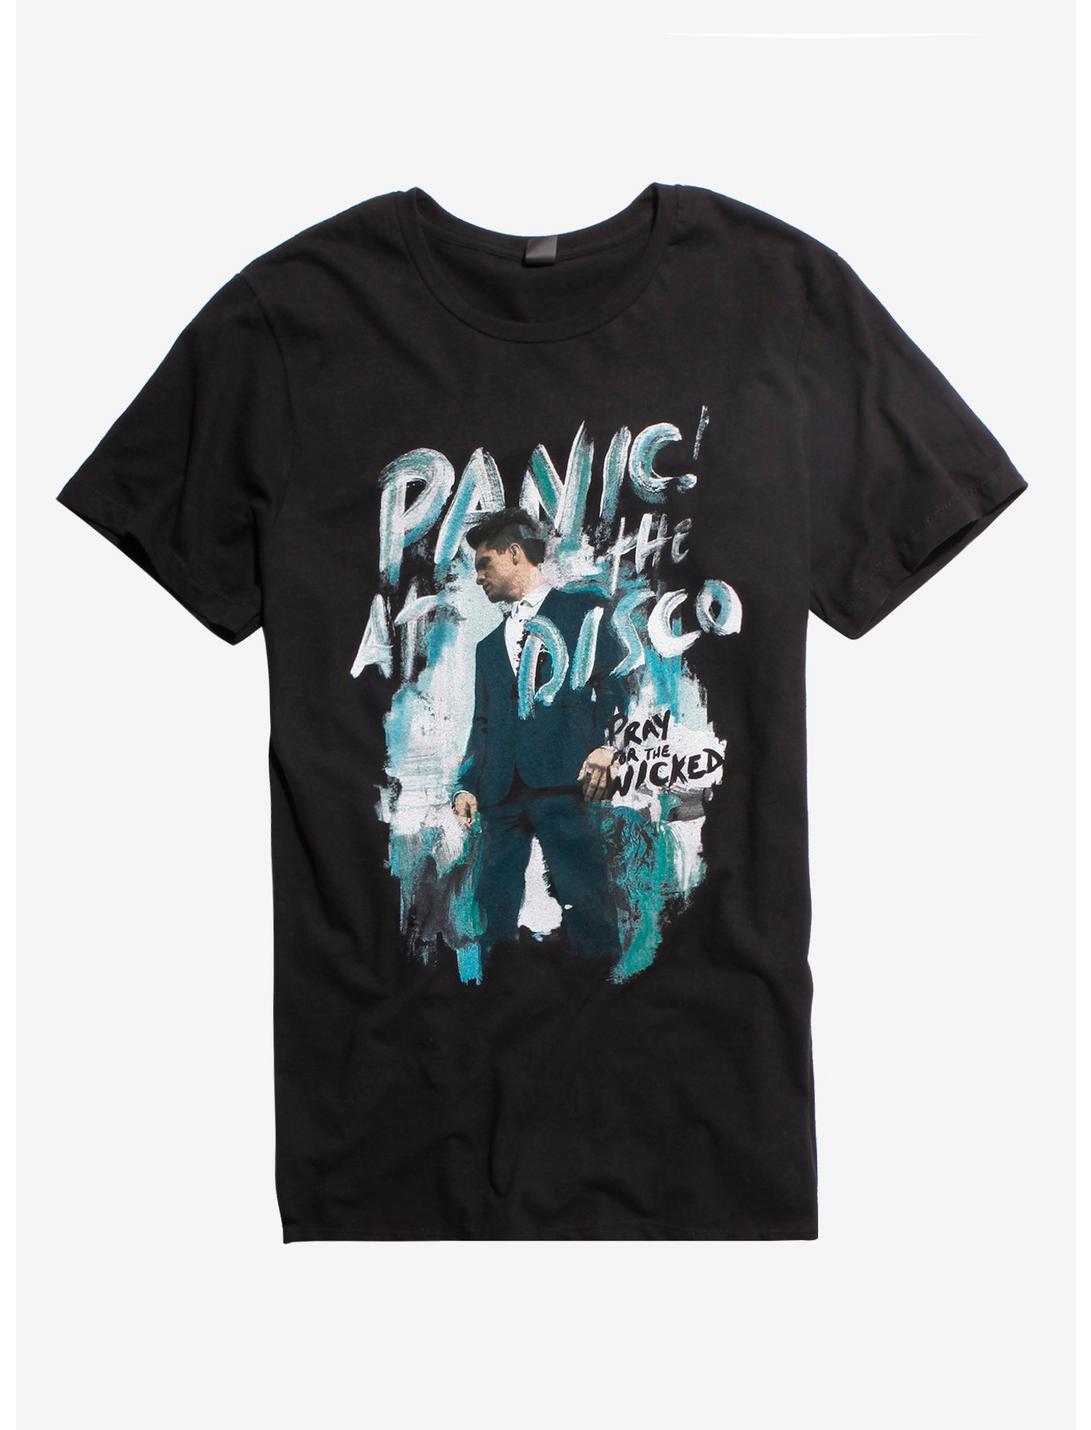 Panic! At The Disco Pray For The Wicked Album Art T-Shirt, BLACK, hi-res